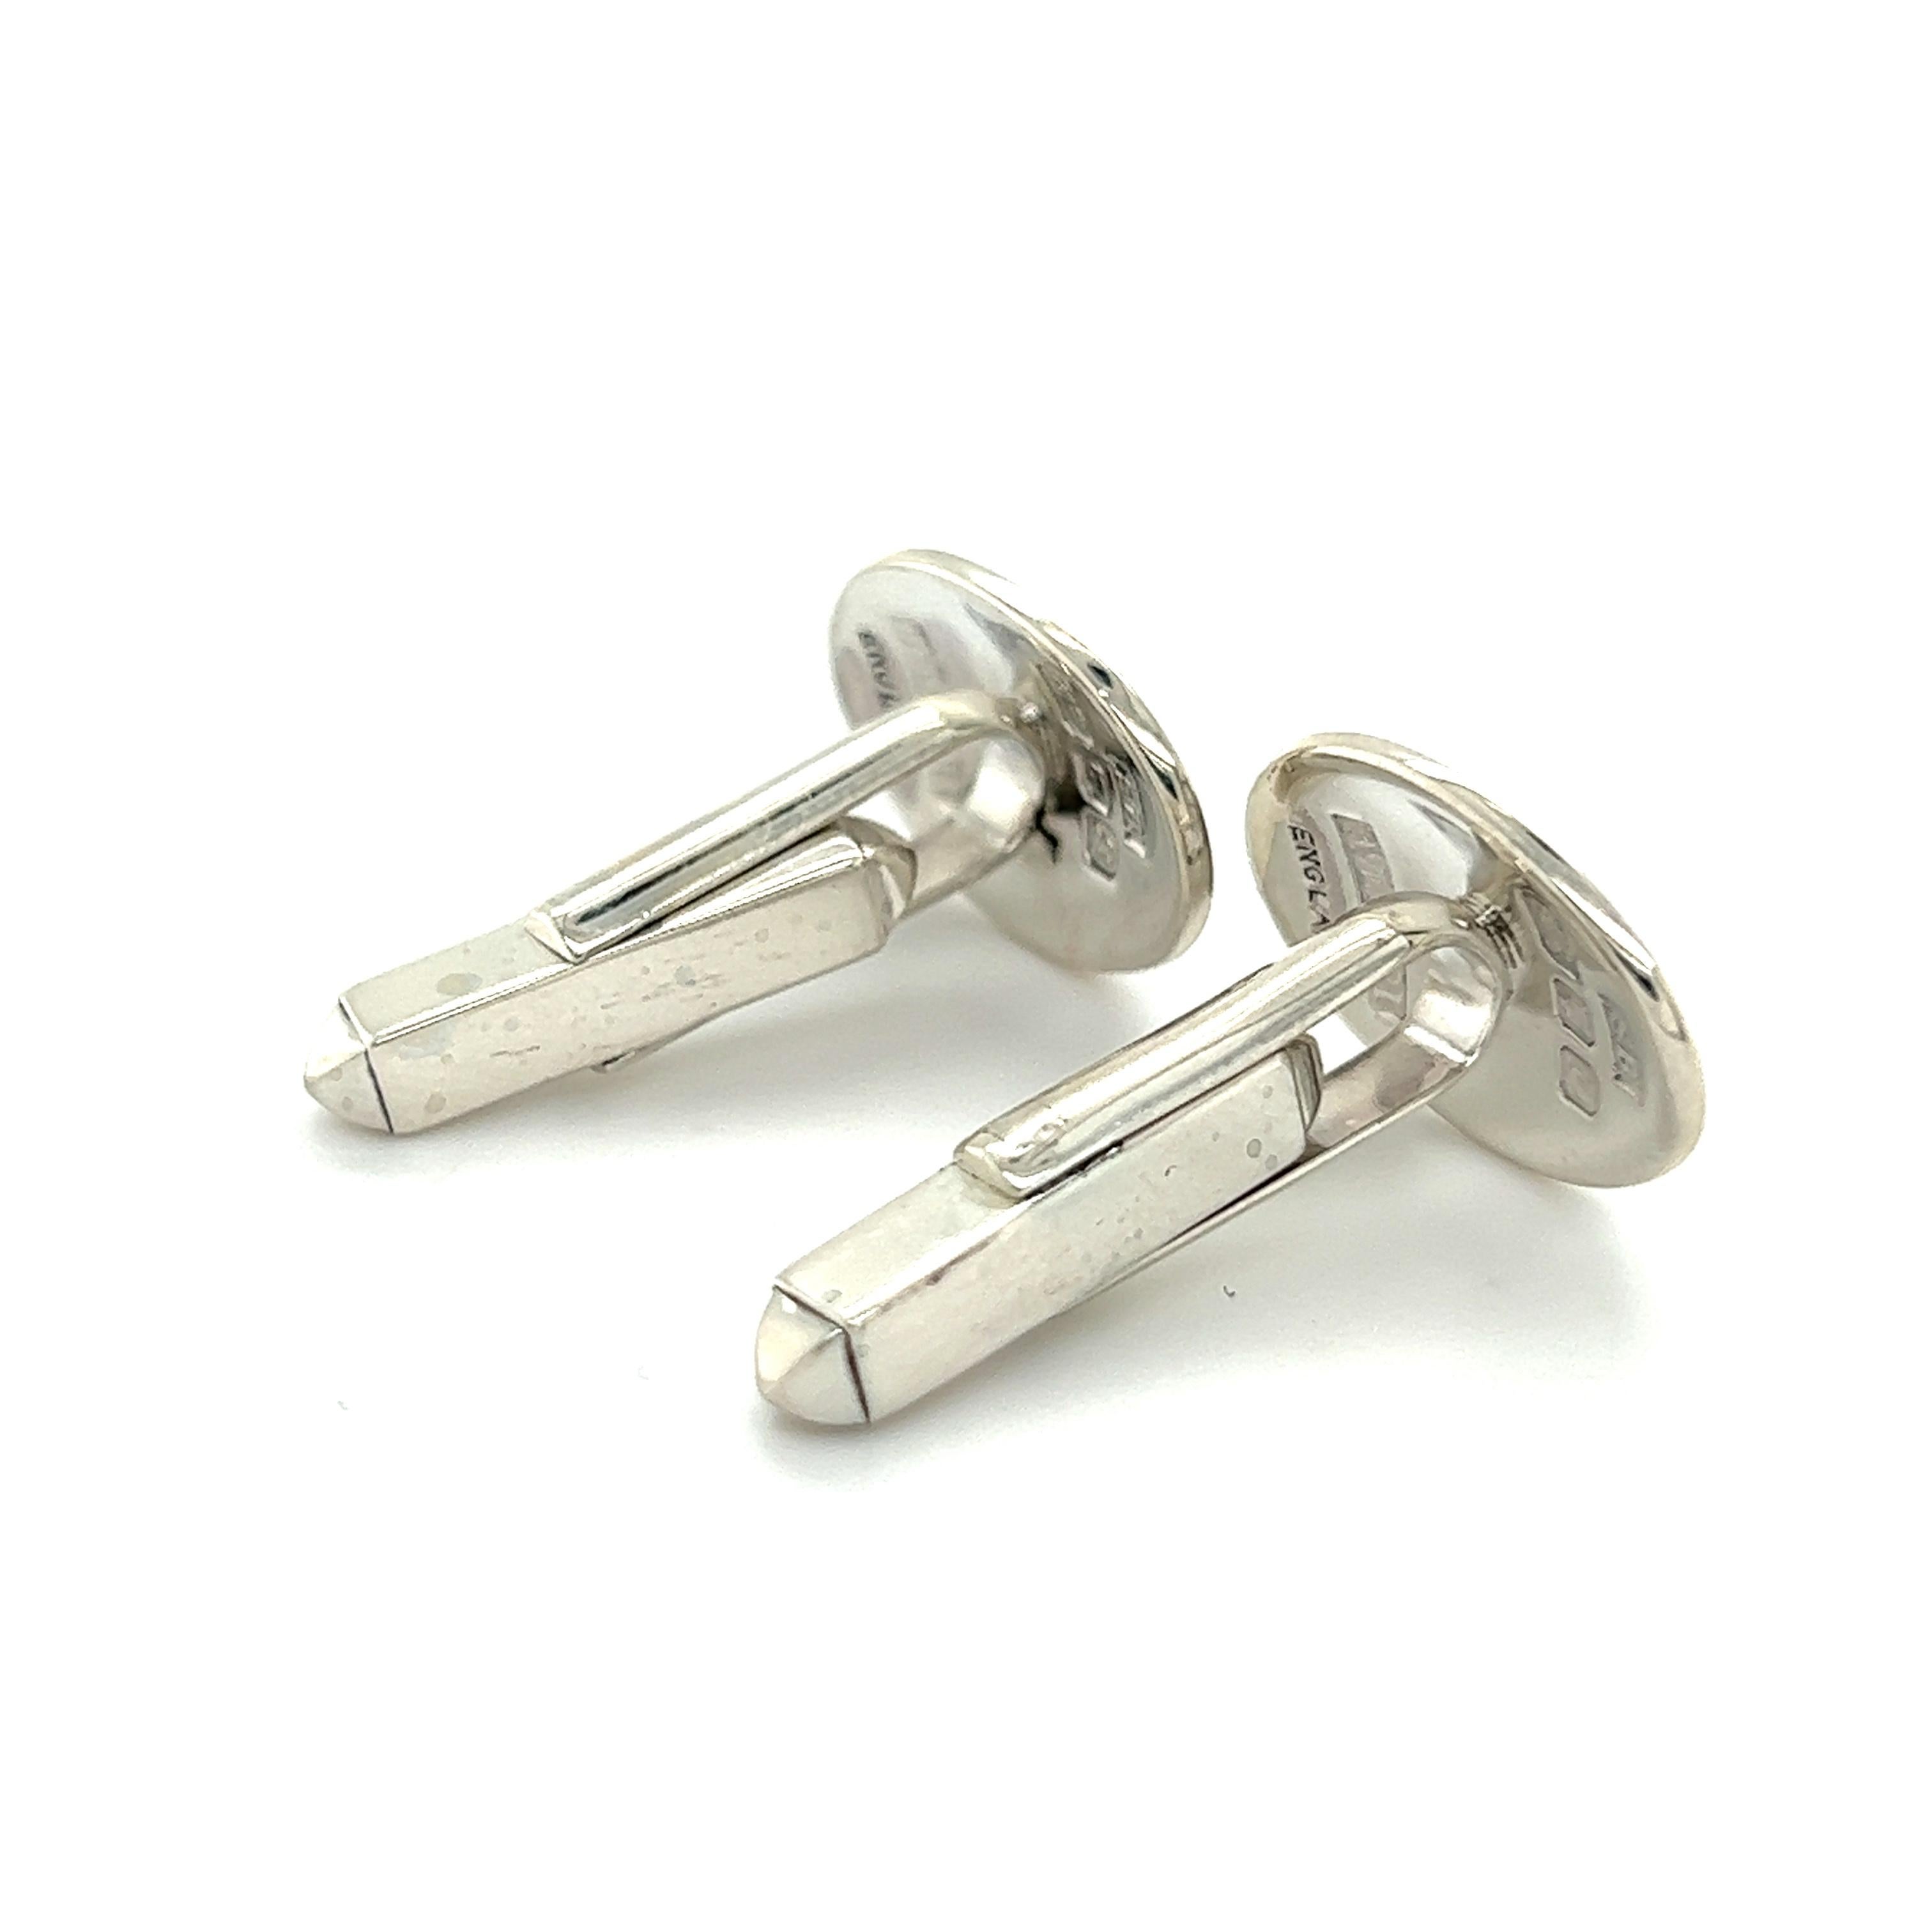 Bulgari Bvlgari Estate Engraveable Mens Cufflinks Sterling Silver B3

TRUSTED SELLER SINCE 2002

PLEASE SEE OUR HUNDREDS OF POSITIVE FEEDBACKS FROM OUR CLIENTS!!

FREE SHIPPING

DETAILS
Material: Sterling Silver
Weight: 9.5 Grams

These Authentic